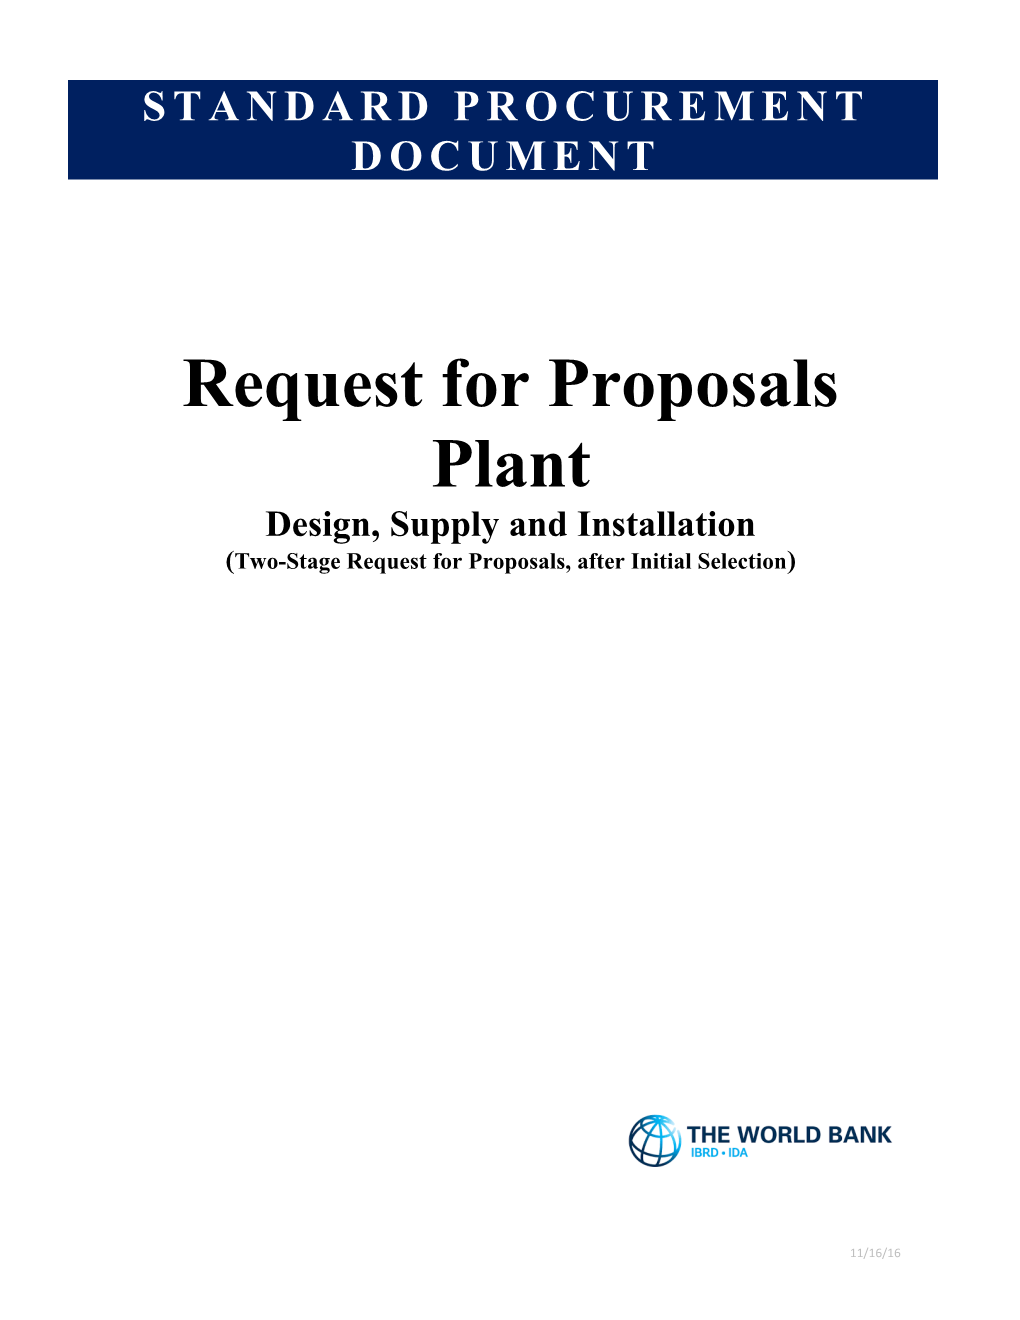 Two-Stage Request for Proposals, After Initial Selection